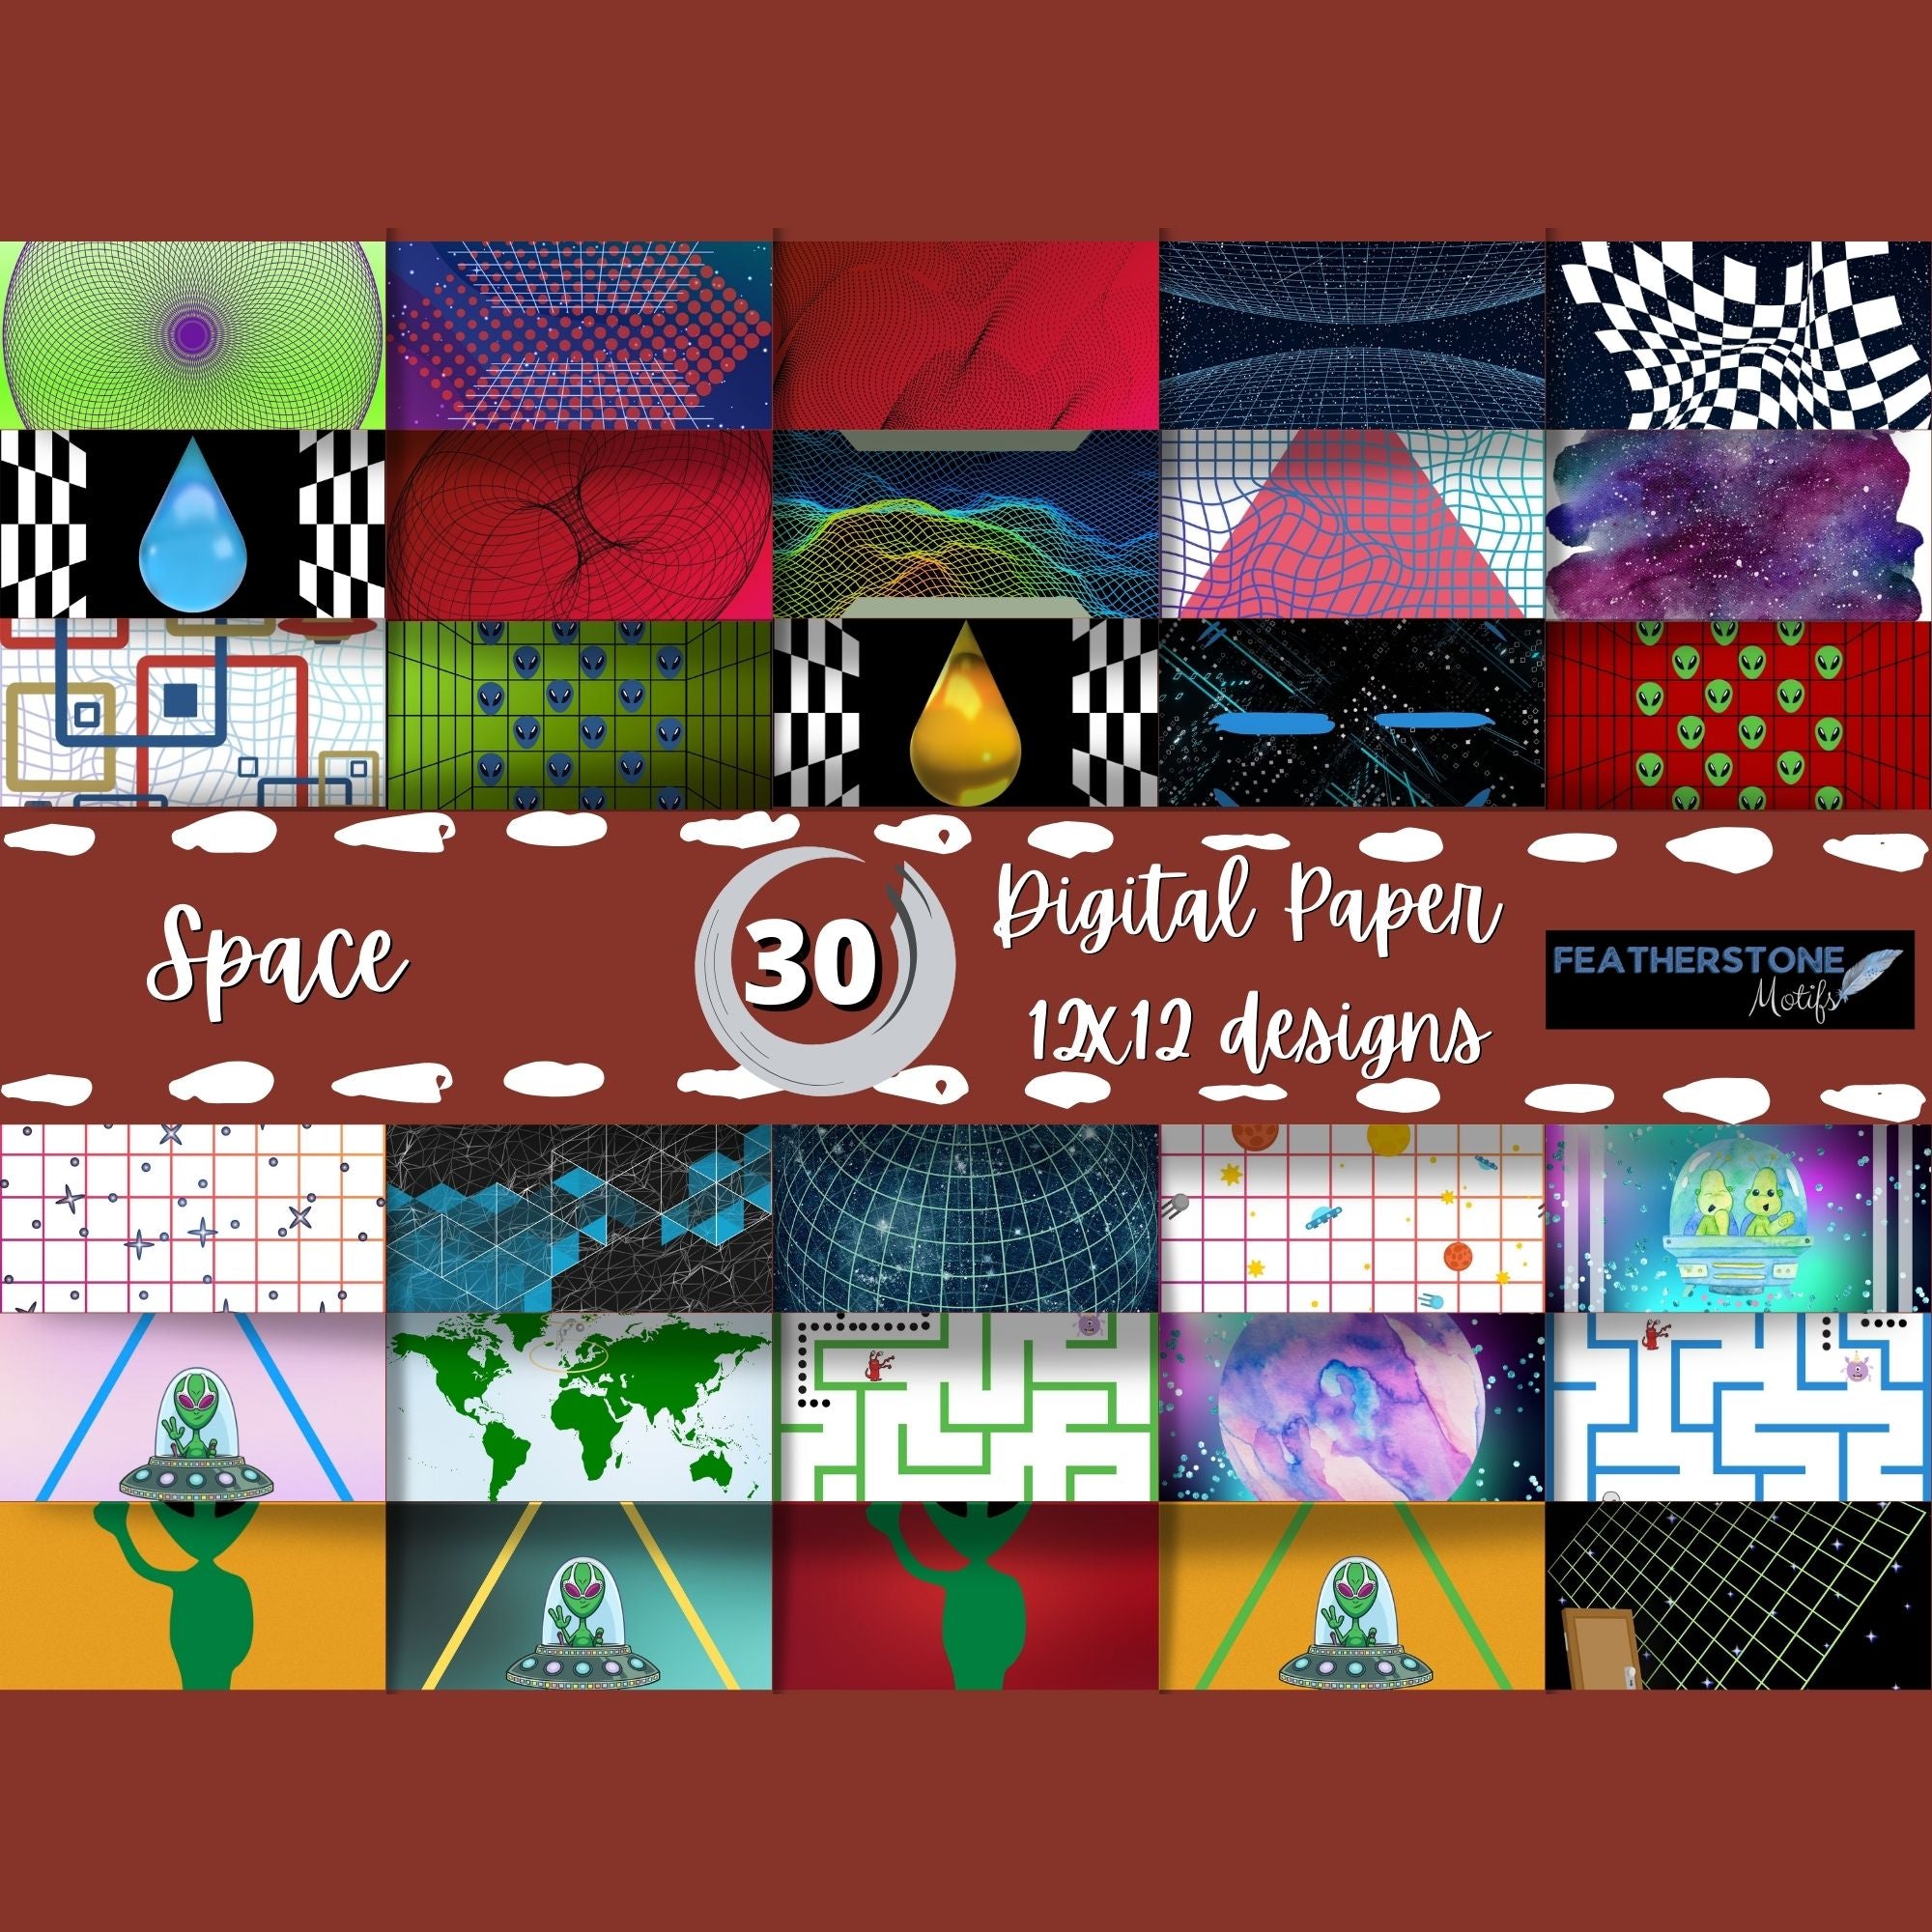 Scrapbookers, this is what you've been looking for! This space and alien themed bundle has 30 unique images that can be printed or used as digital backgrounds.